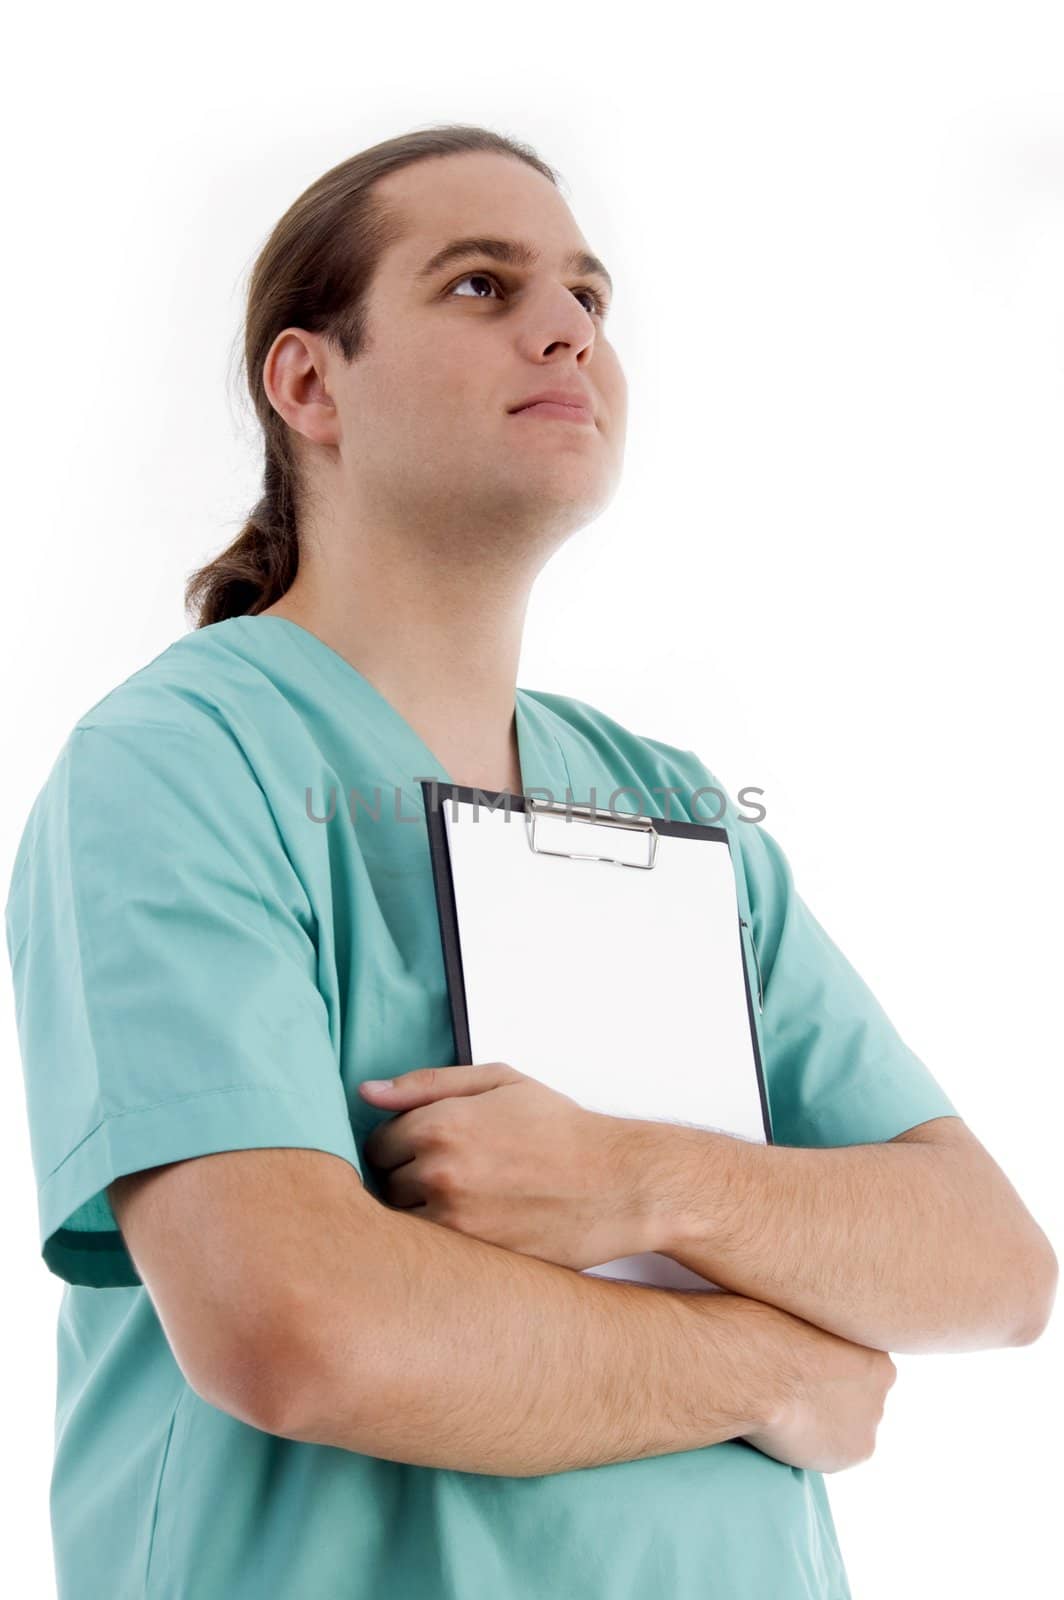 smart pose of doctor holding clipboard by imagerymajestic